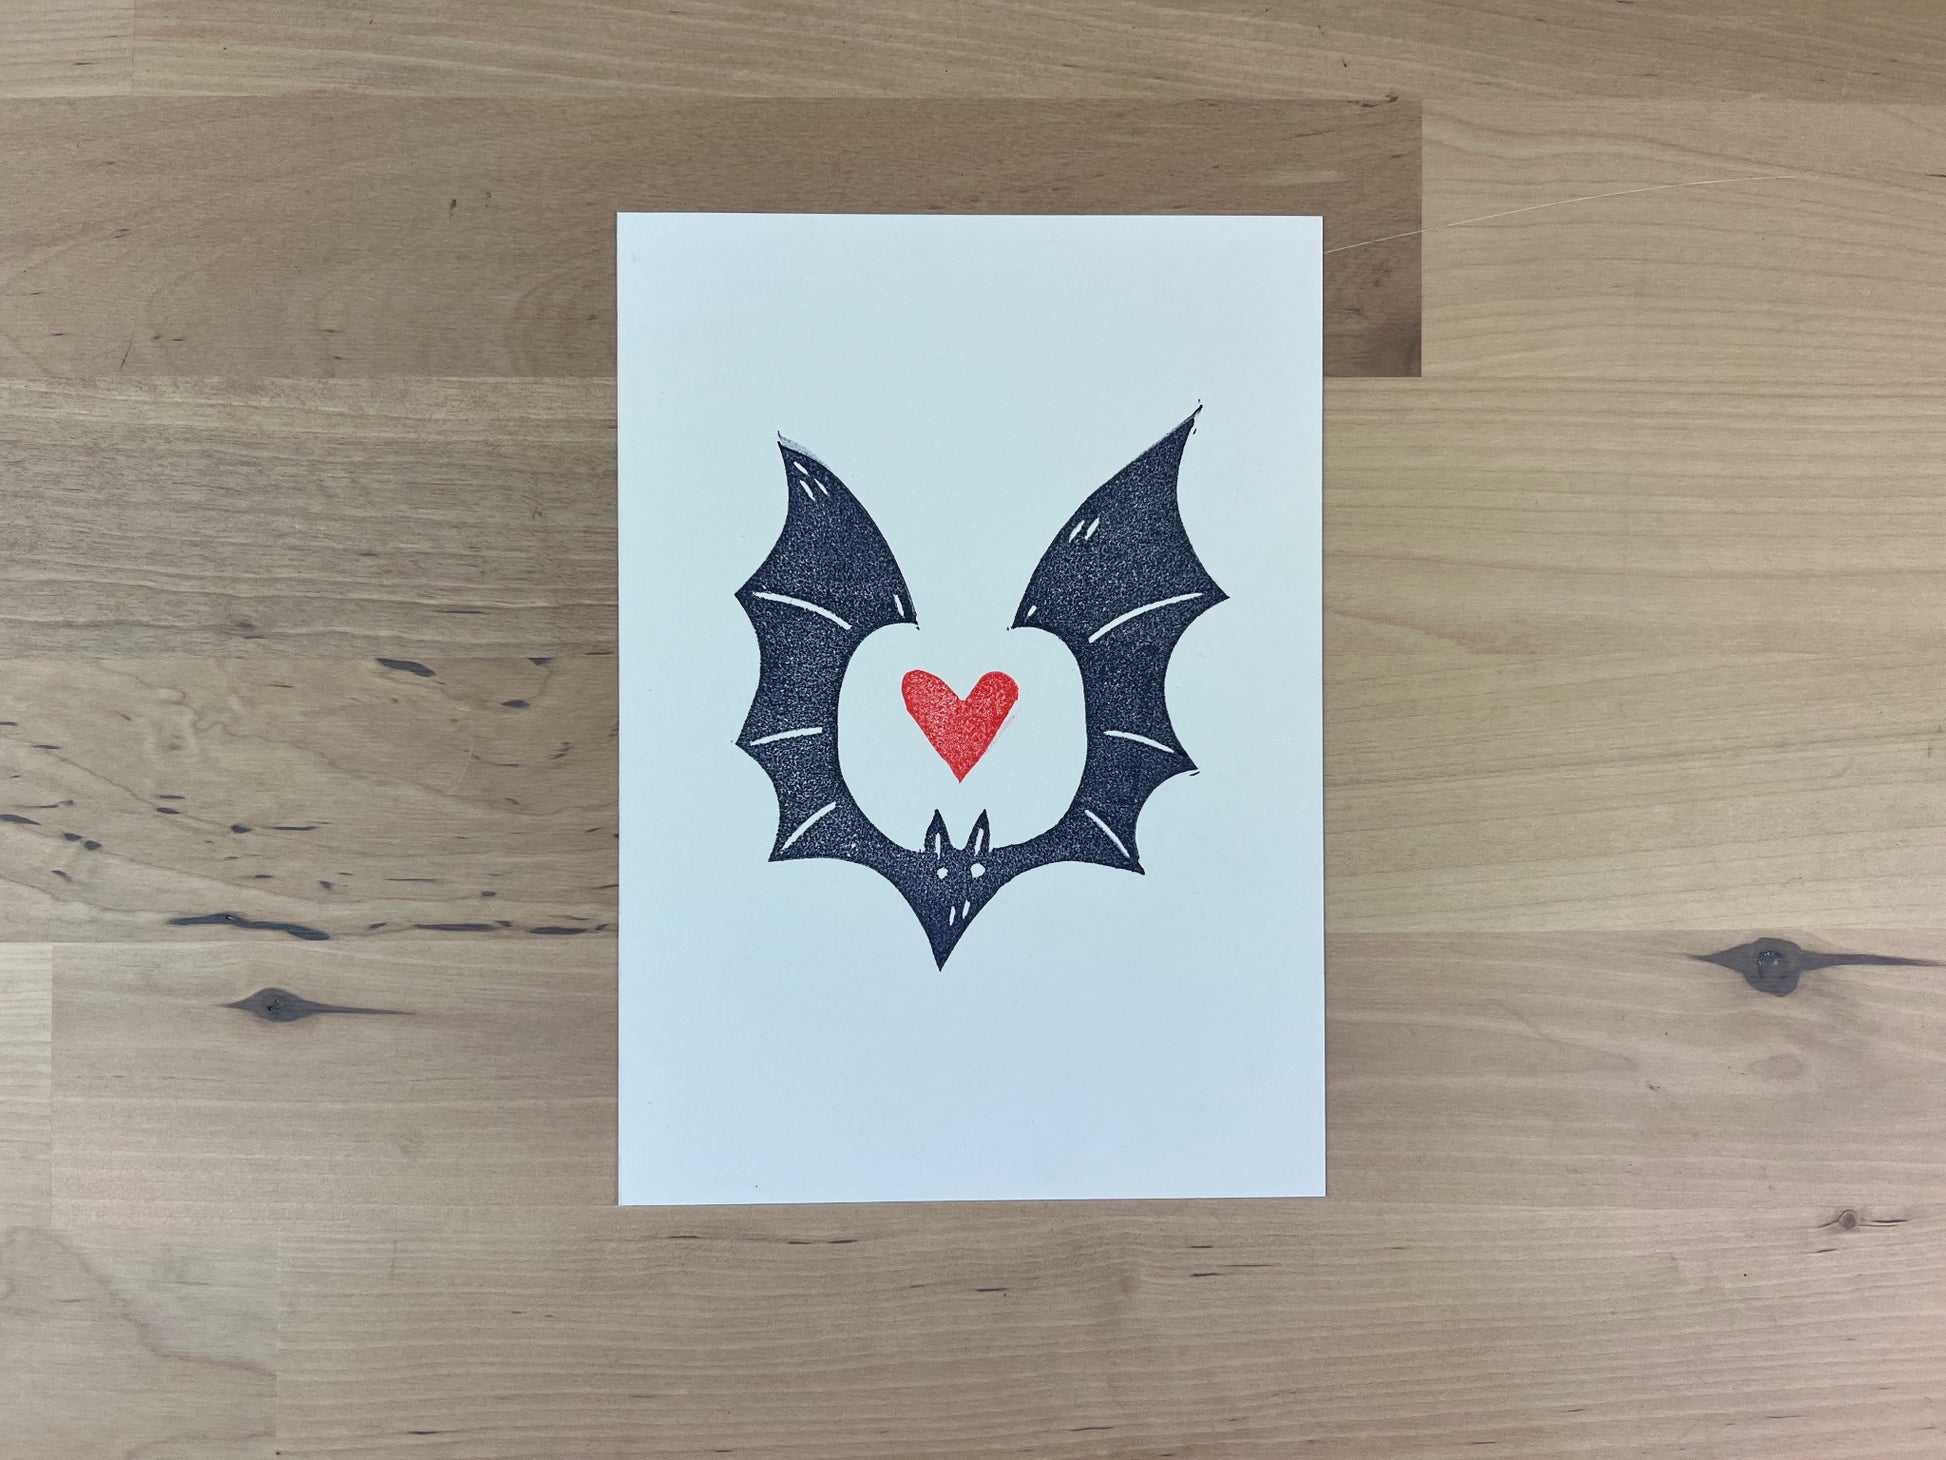 Hand printed illustration of a navy blue bat with a red heart between it's wings.